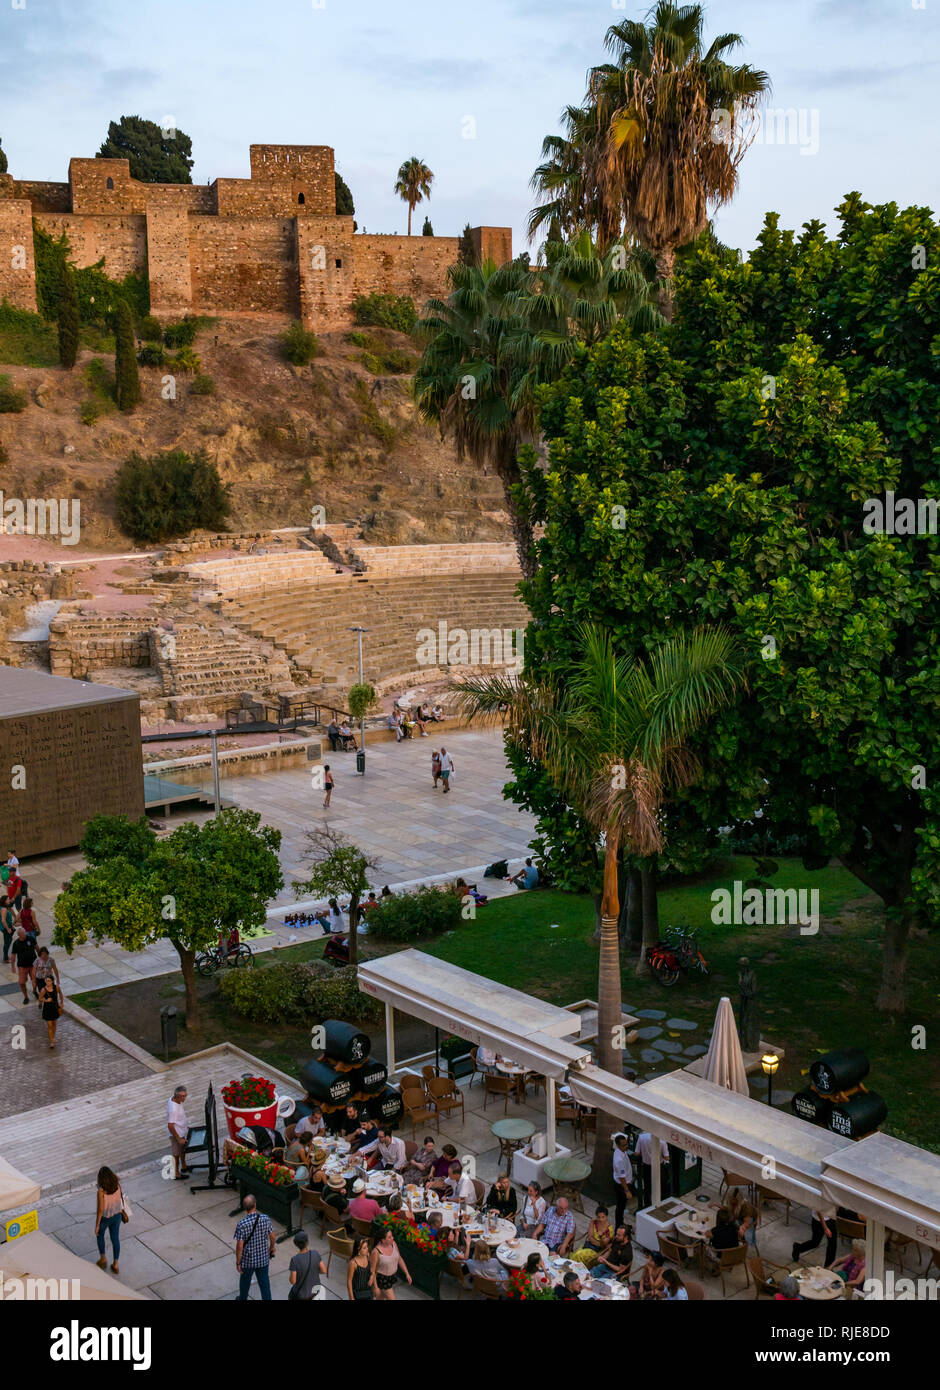 Alcazaba fortified walls and Roman Theatre at dusk with people eating at outdoor pavement tables, Malaga, Andalusia, Spain Stock Photo